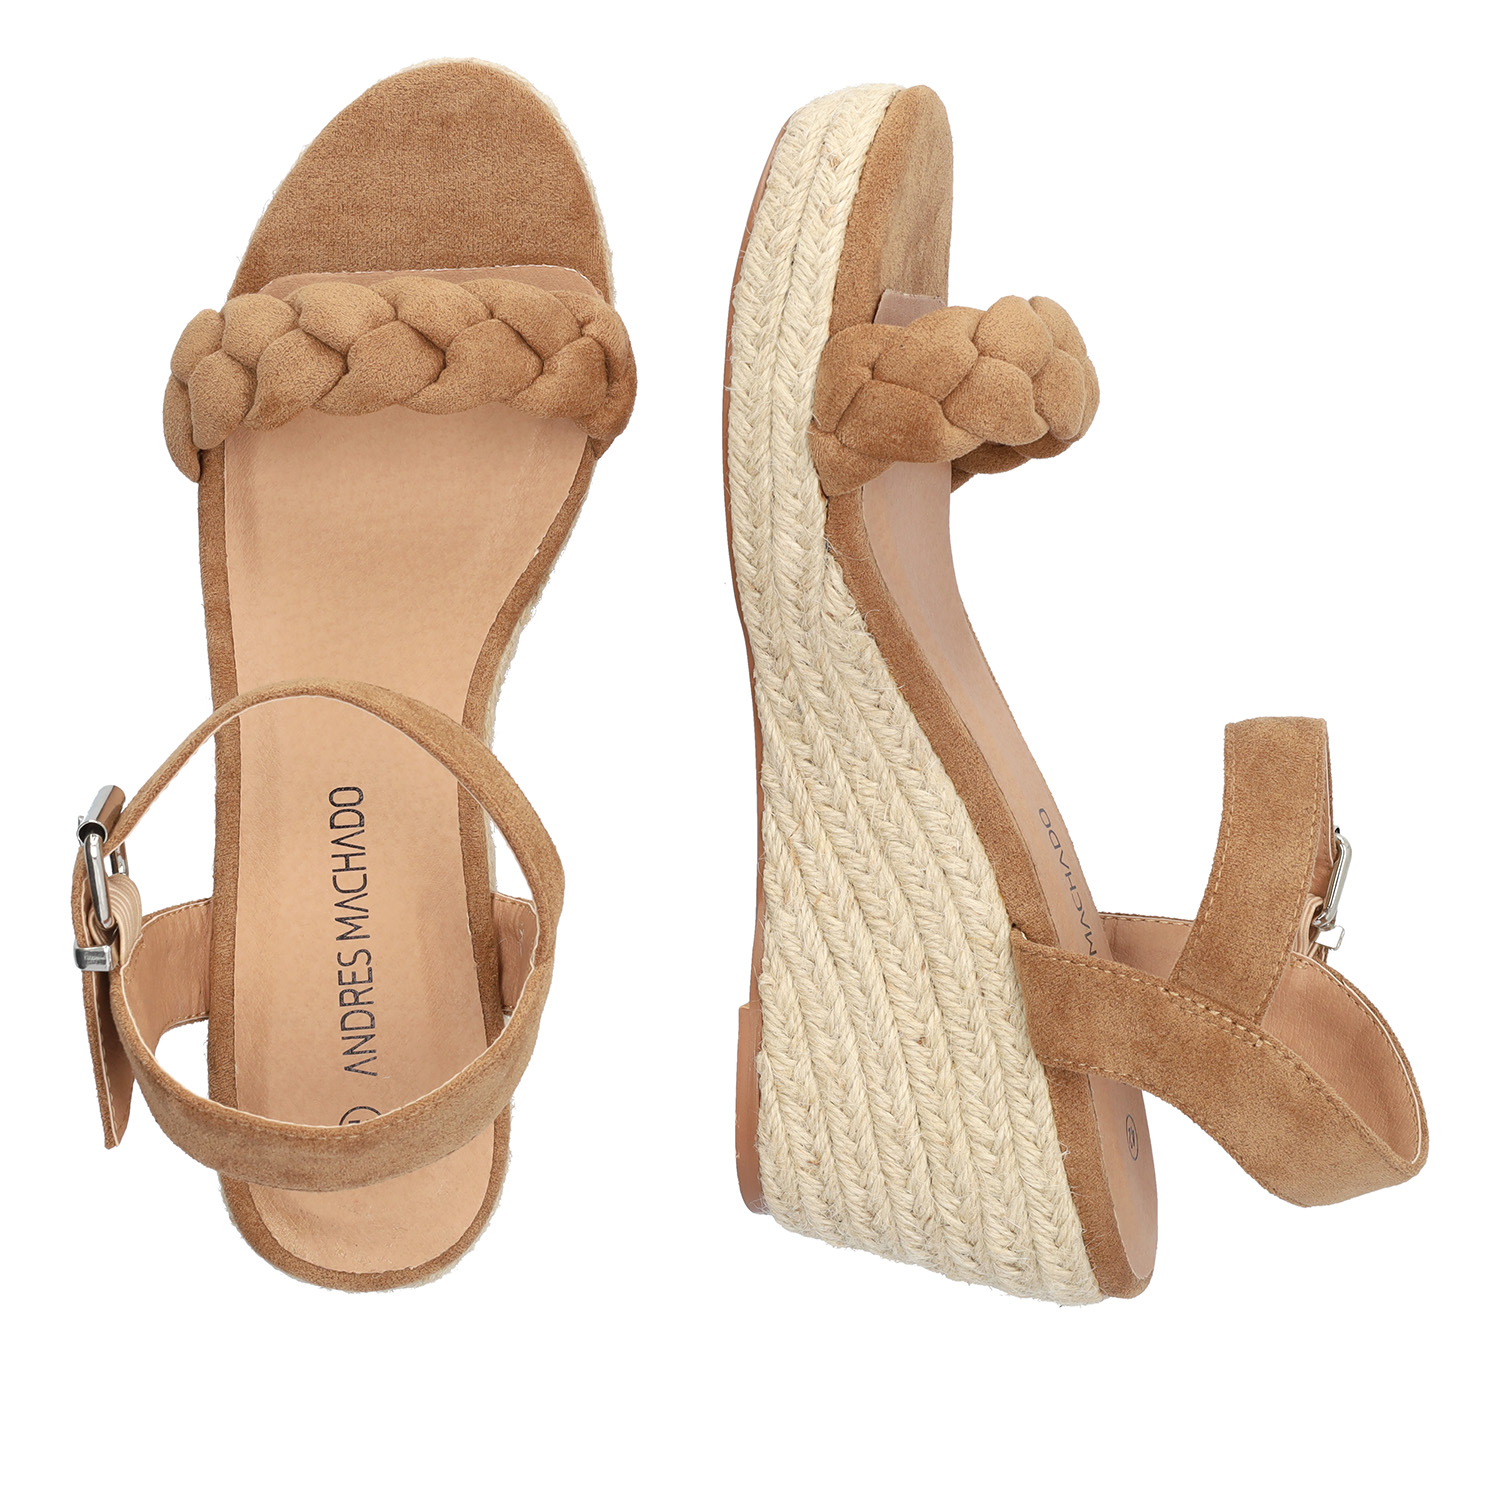 Brown faux suede sandal with a jute wedge 